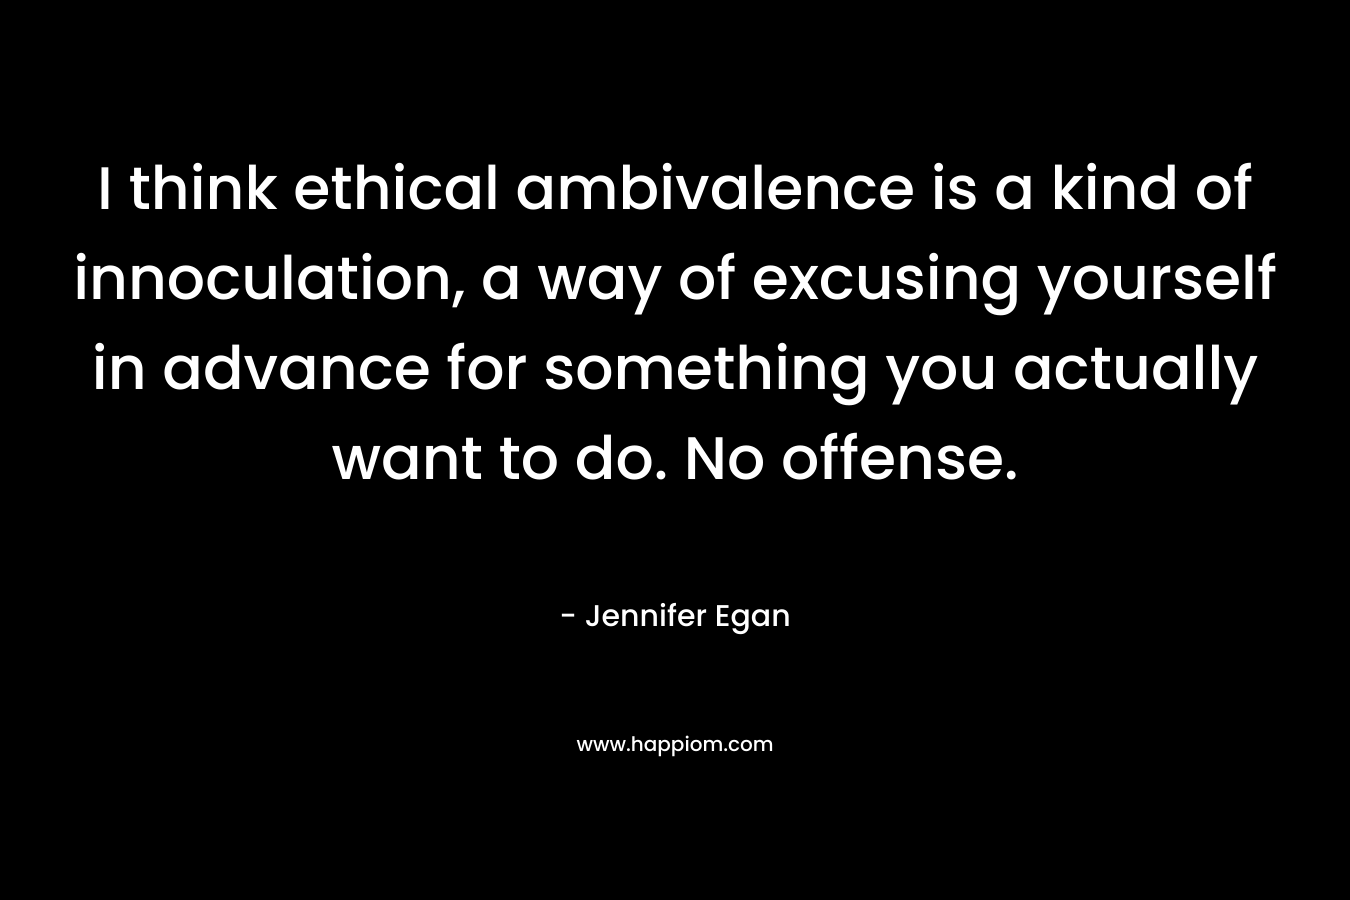 I think ethical ambivalence is a kind of innoculation, a way of excusing yourself in advance for something you actually want to do. No offense.